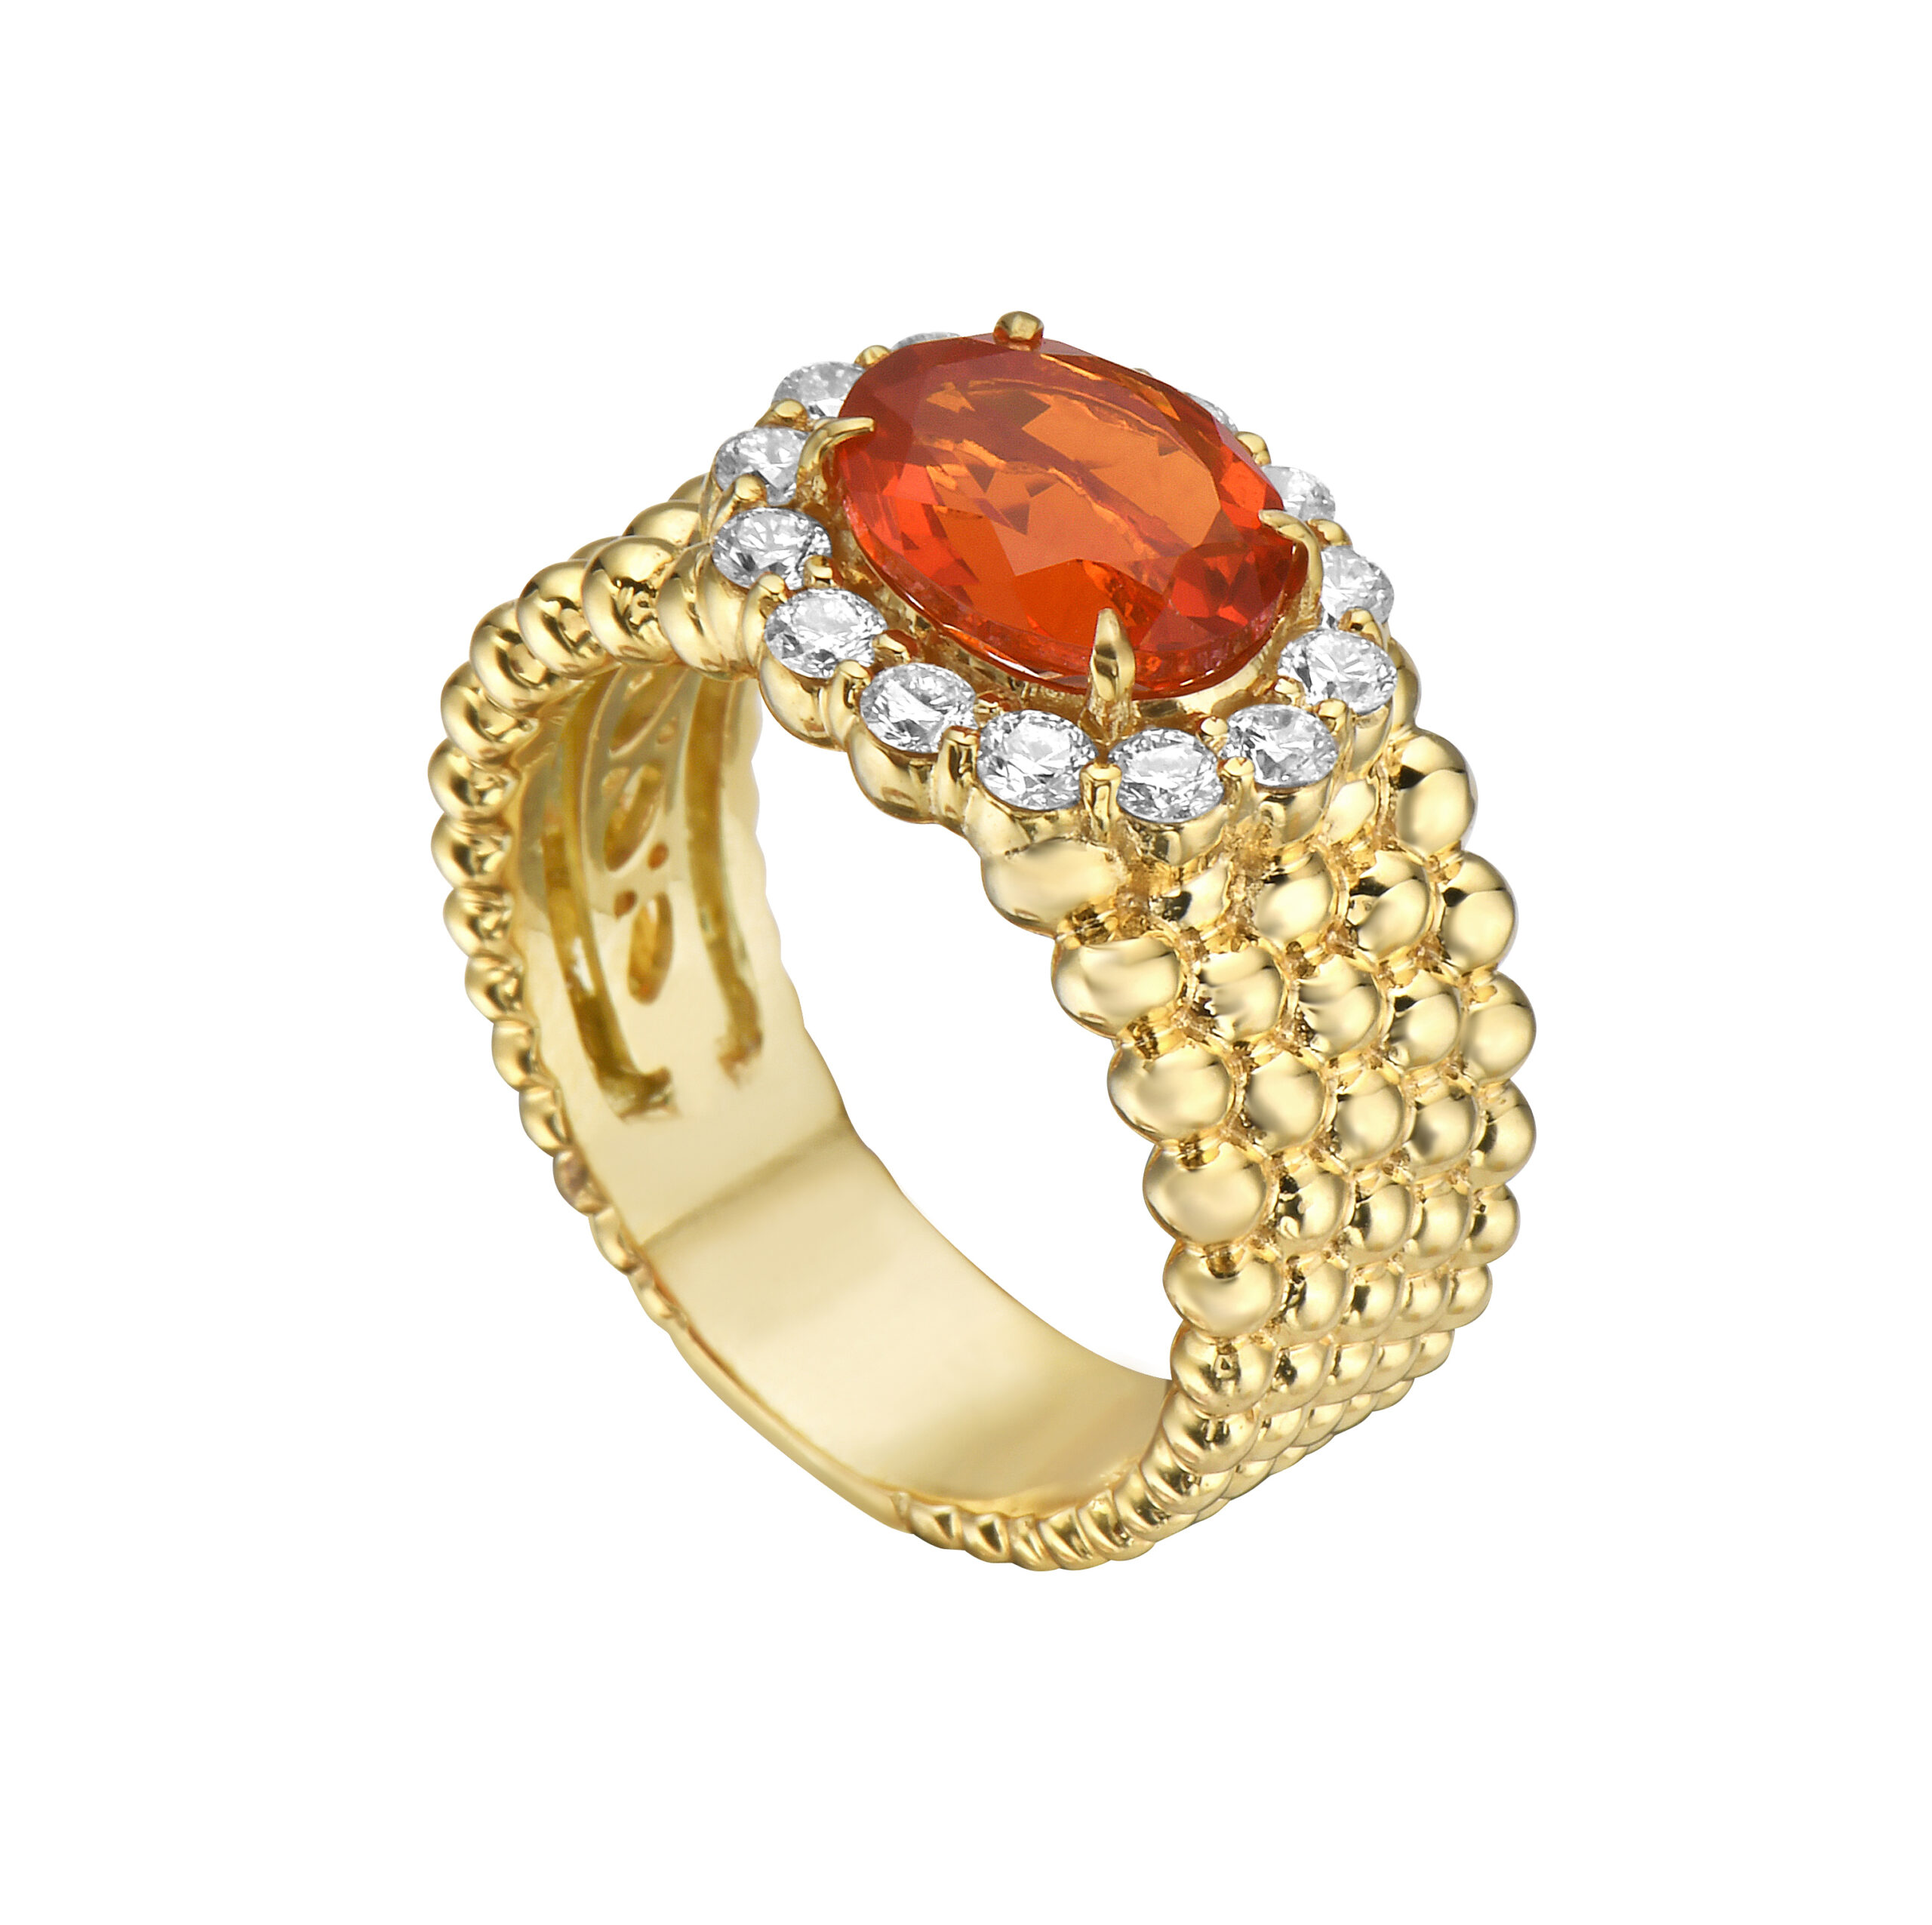 Phoenix Fire Opal Bead Ring In 18K Yellow Gold With Diamonds